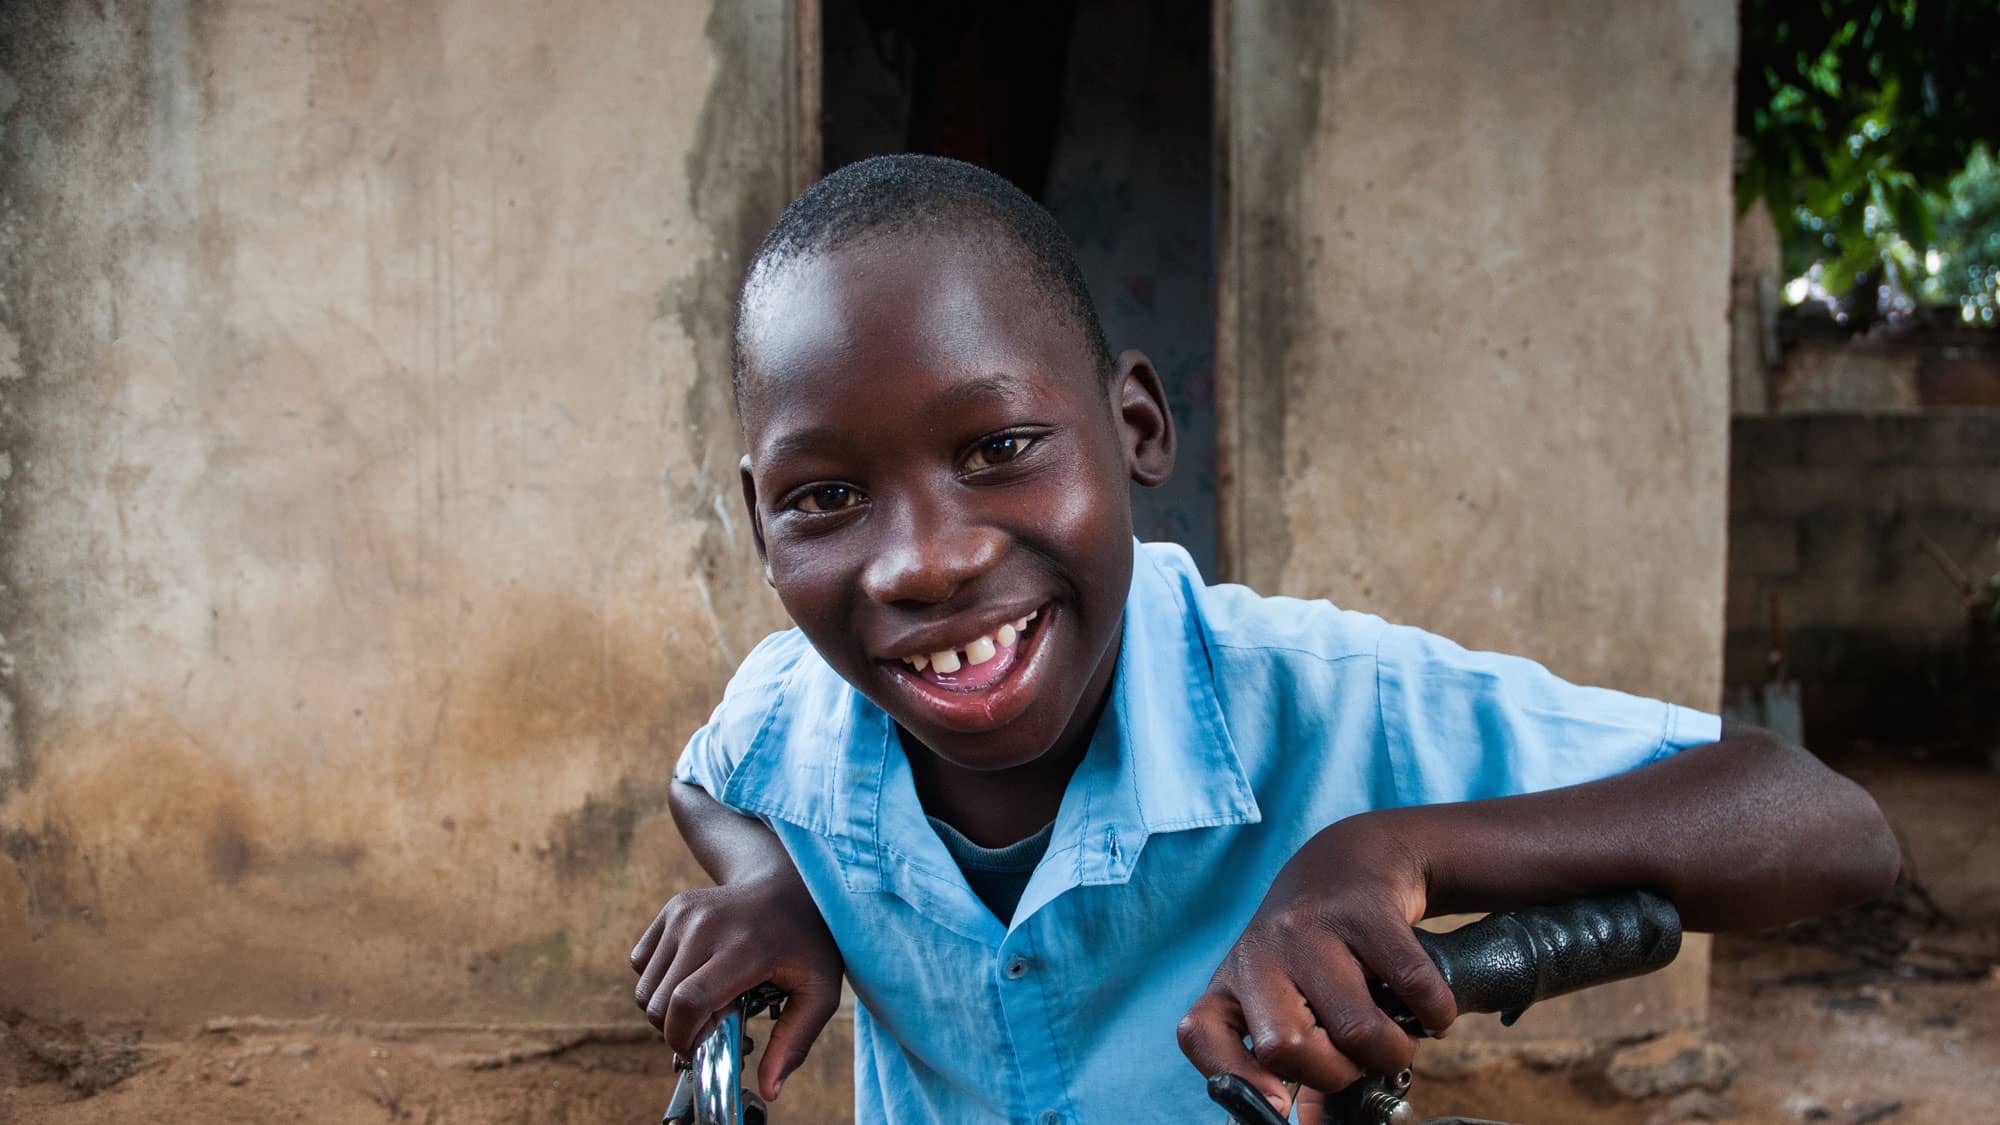 Ilídio, 11, benefits from UNICEF's support for children with disabilities in Mozambique.